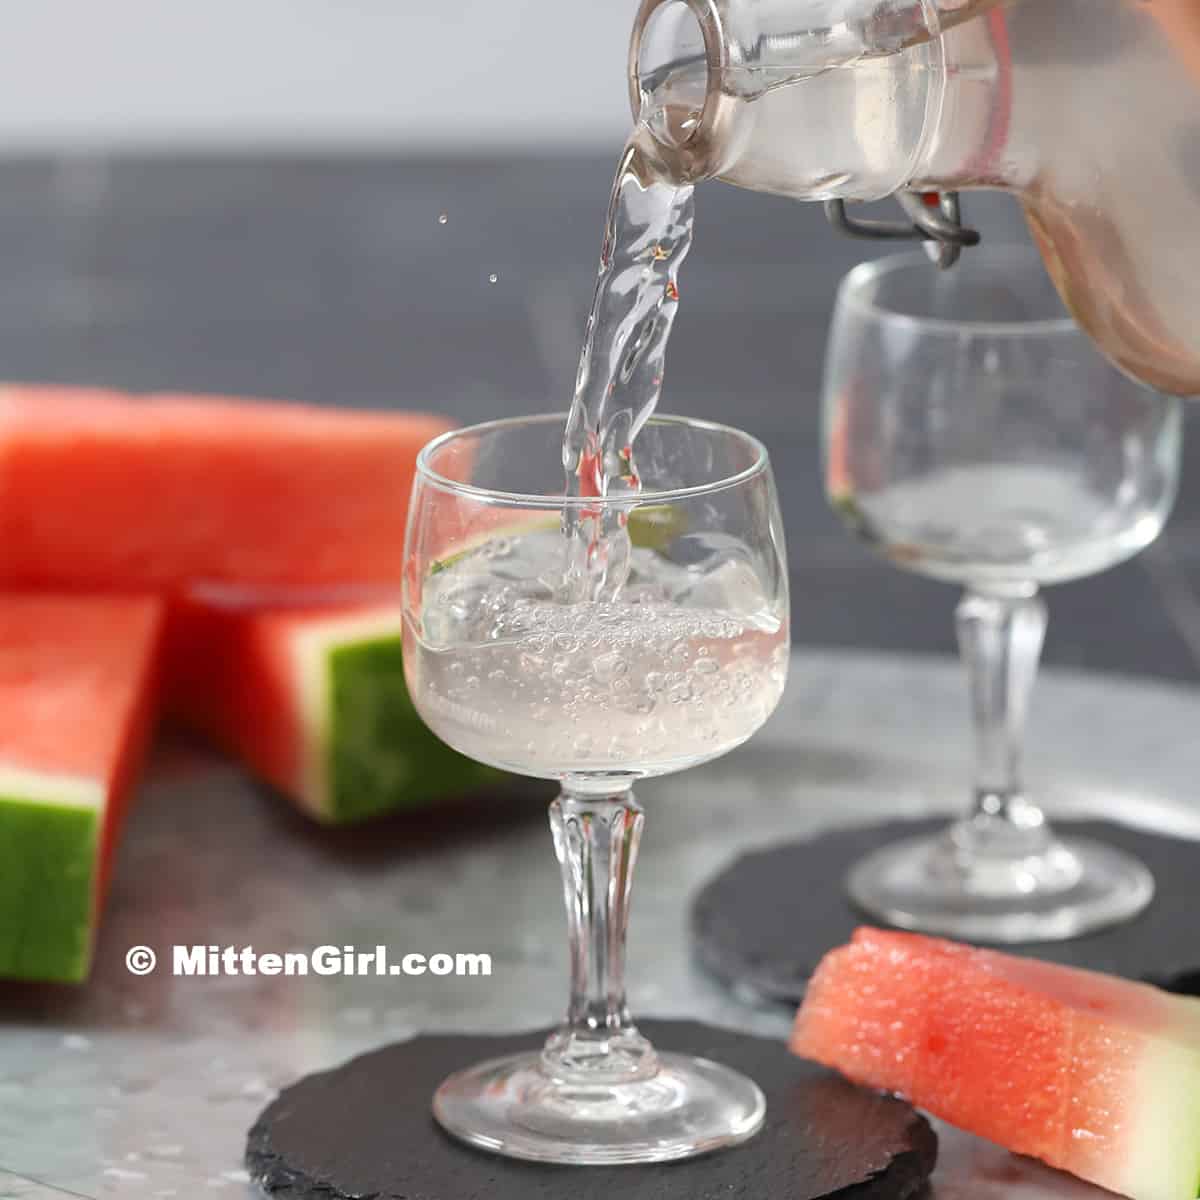 Watermelon Infused Vodka being poured into a small glass.